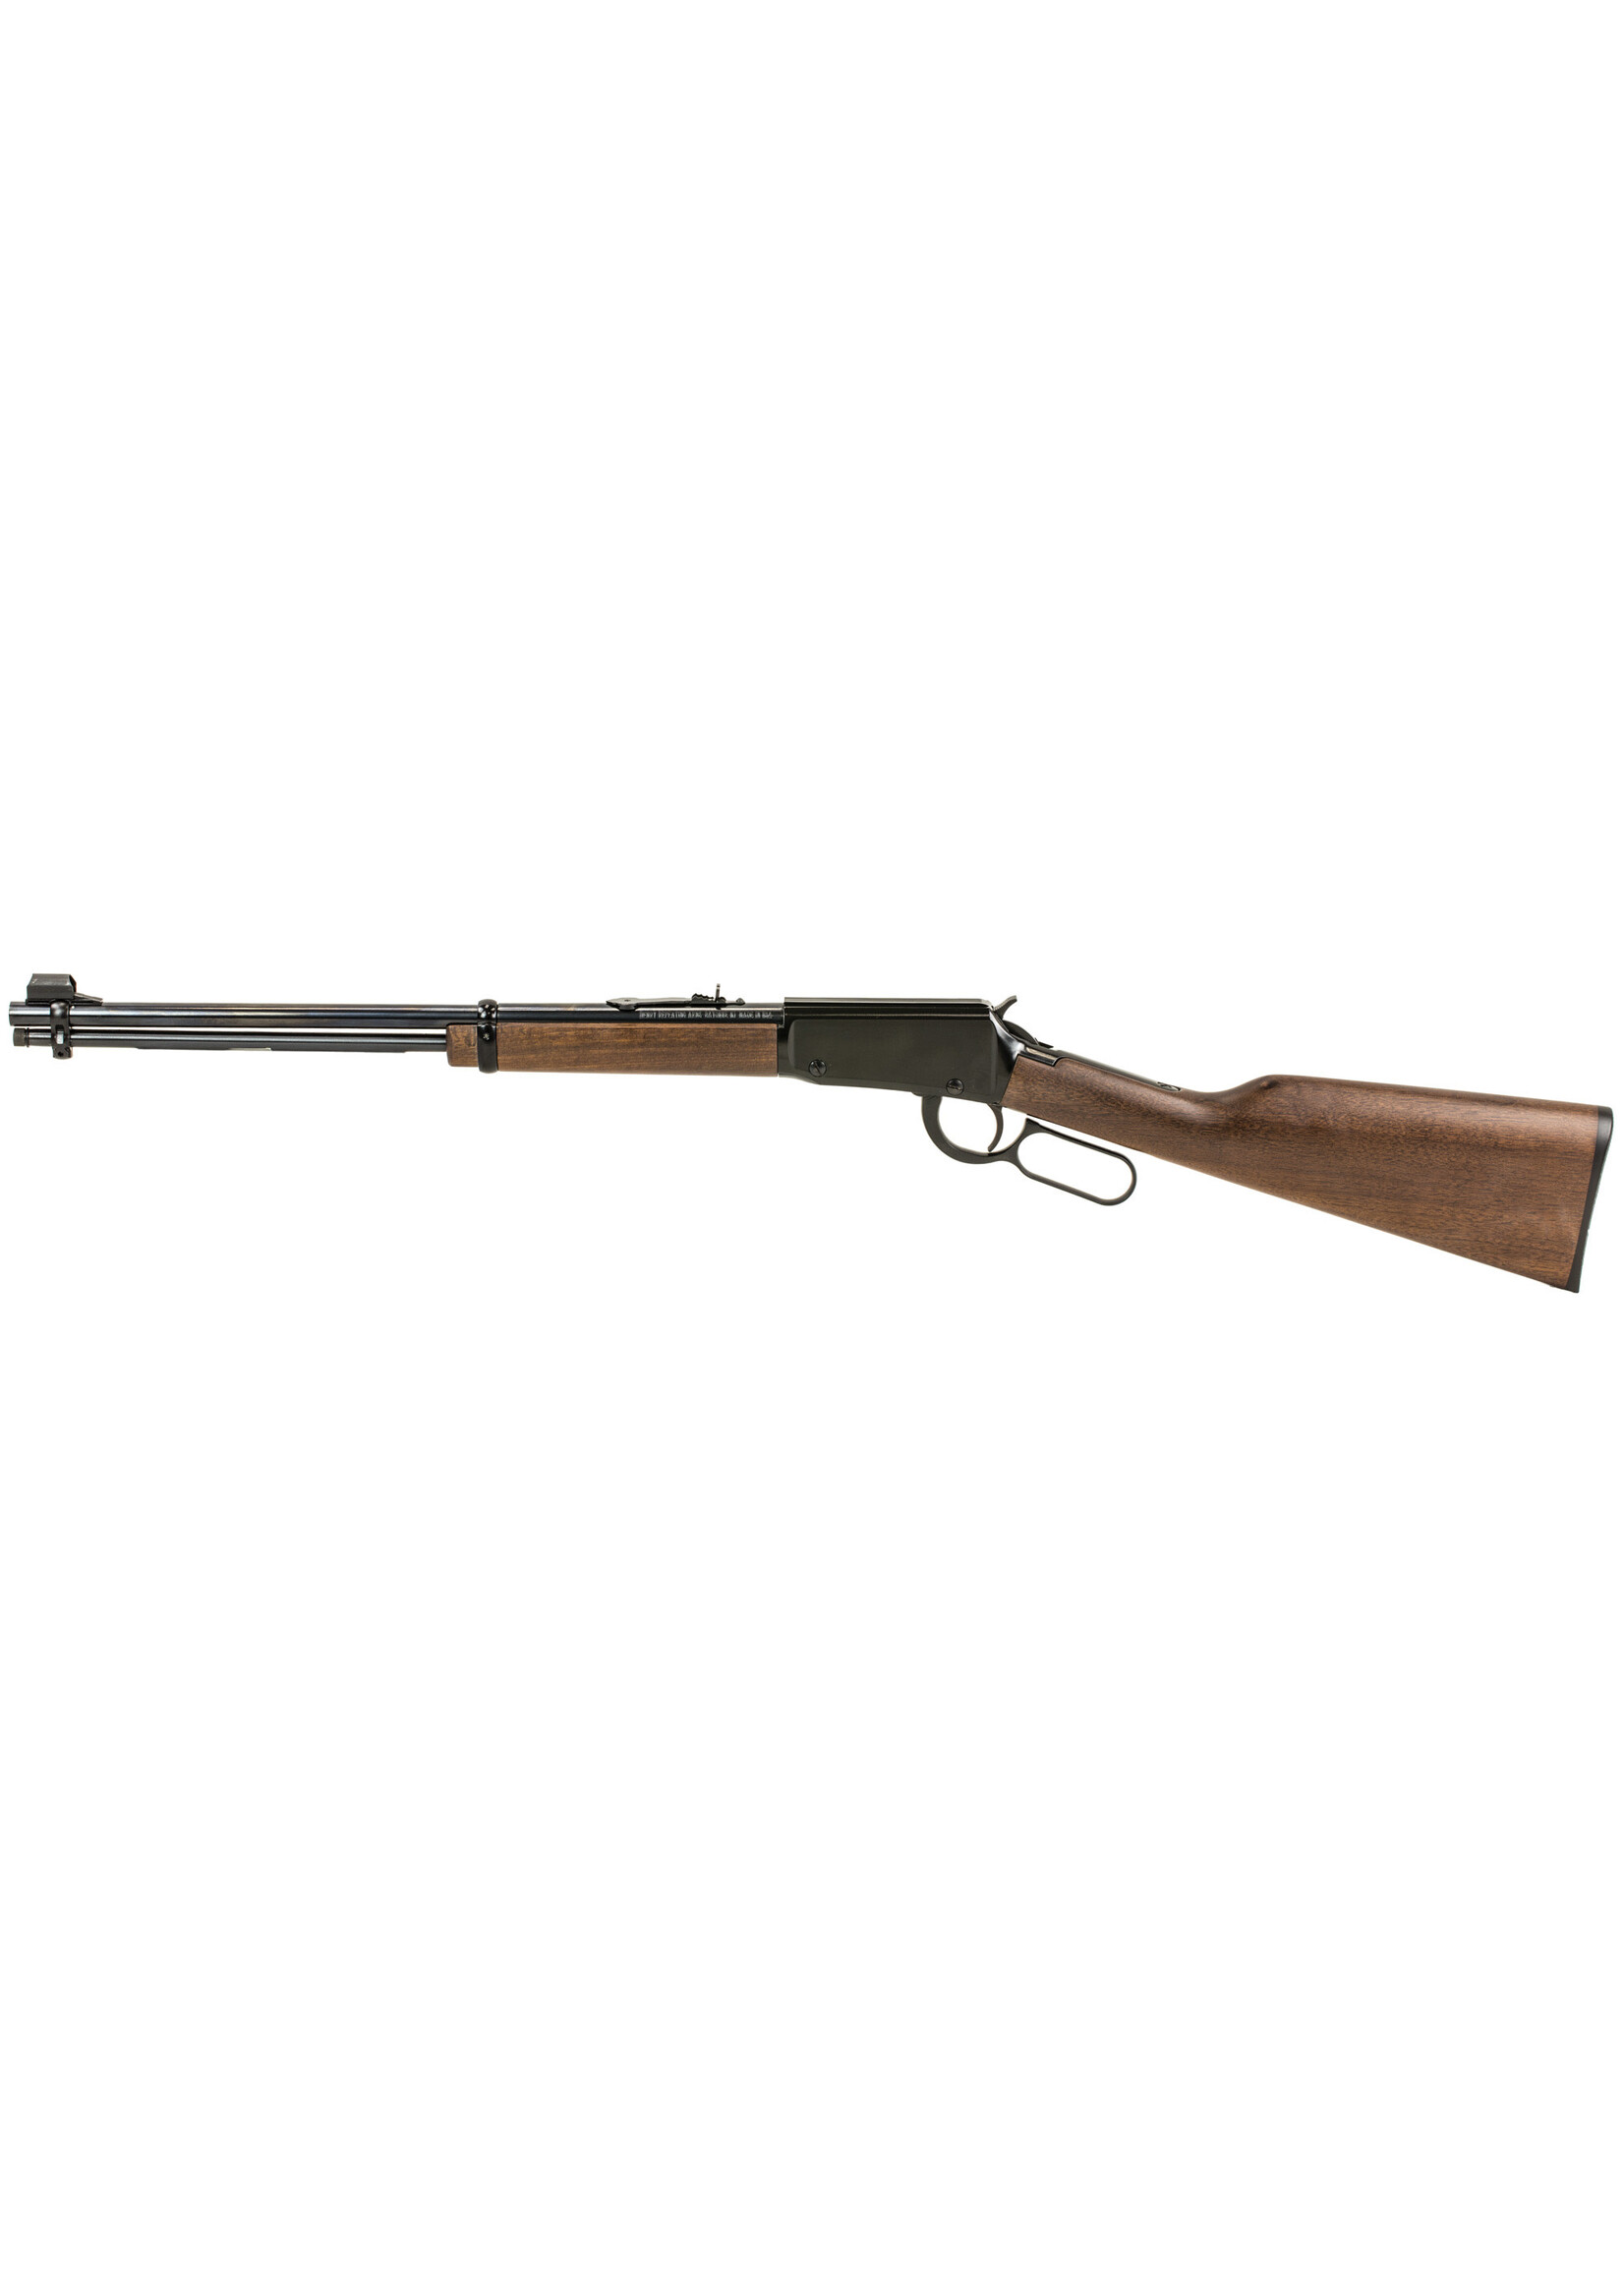 HENRY REPEATING ARMS CLASSIC LEVER ACTION .22LR 15RD 18.5"